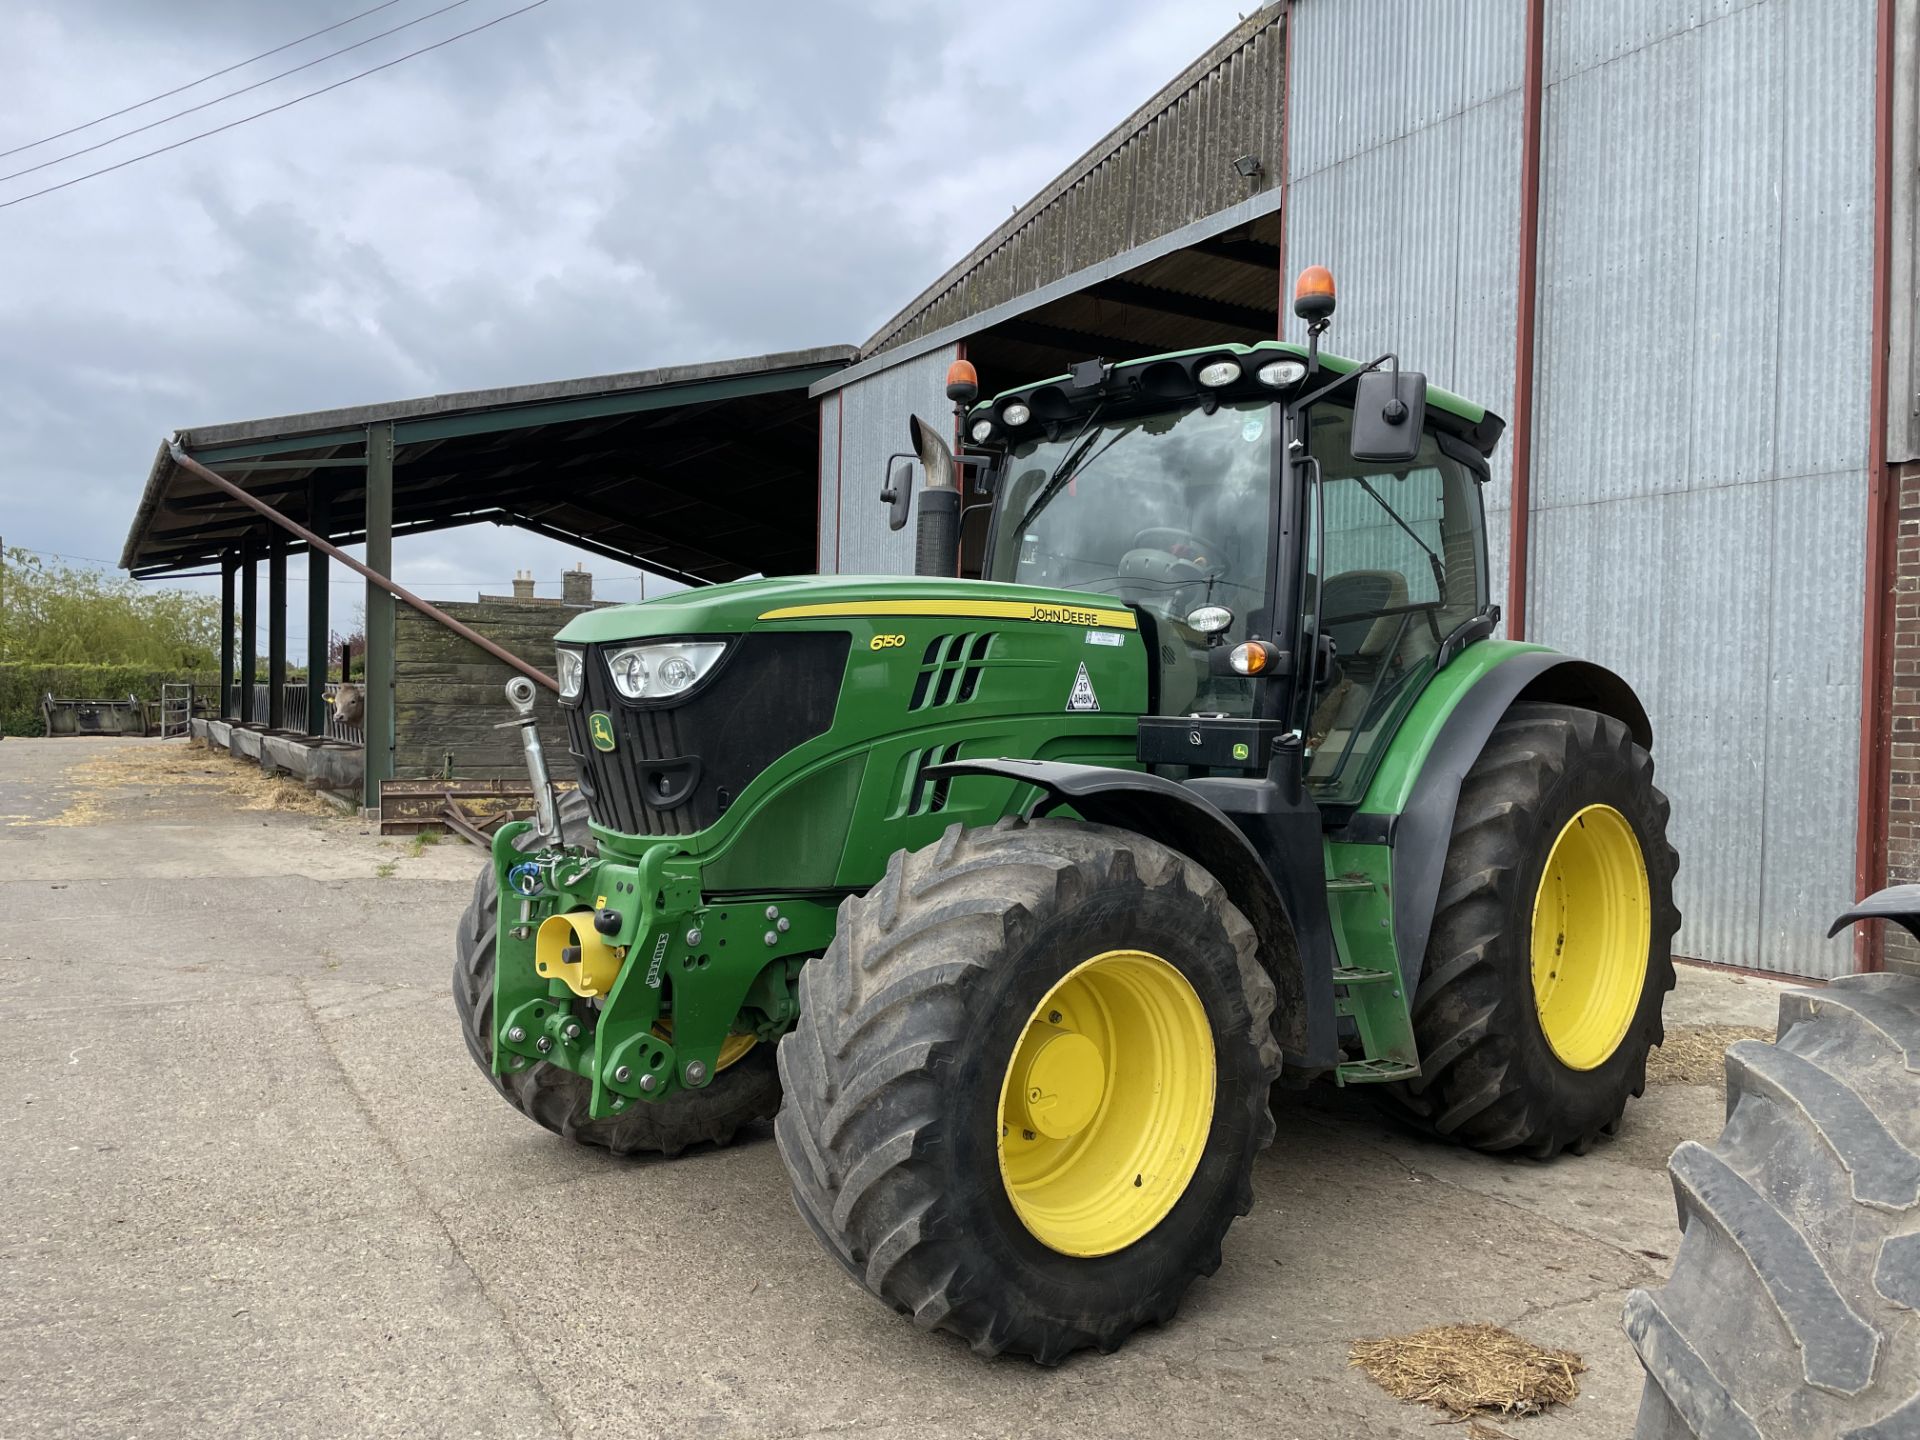 2013 John Deere 6150R 4wd Tractor, approx 6112 hours, Reg No. - Image 4 of 13